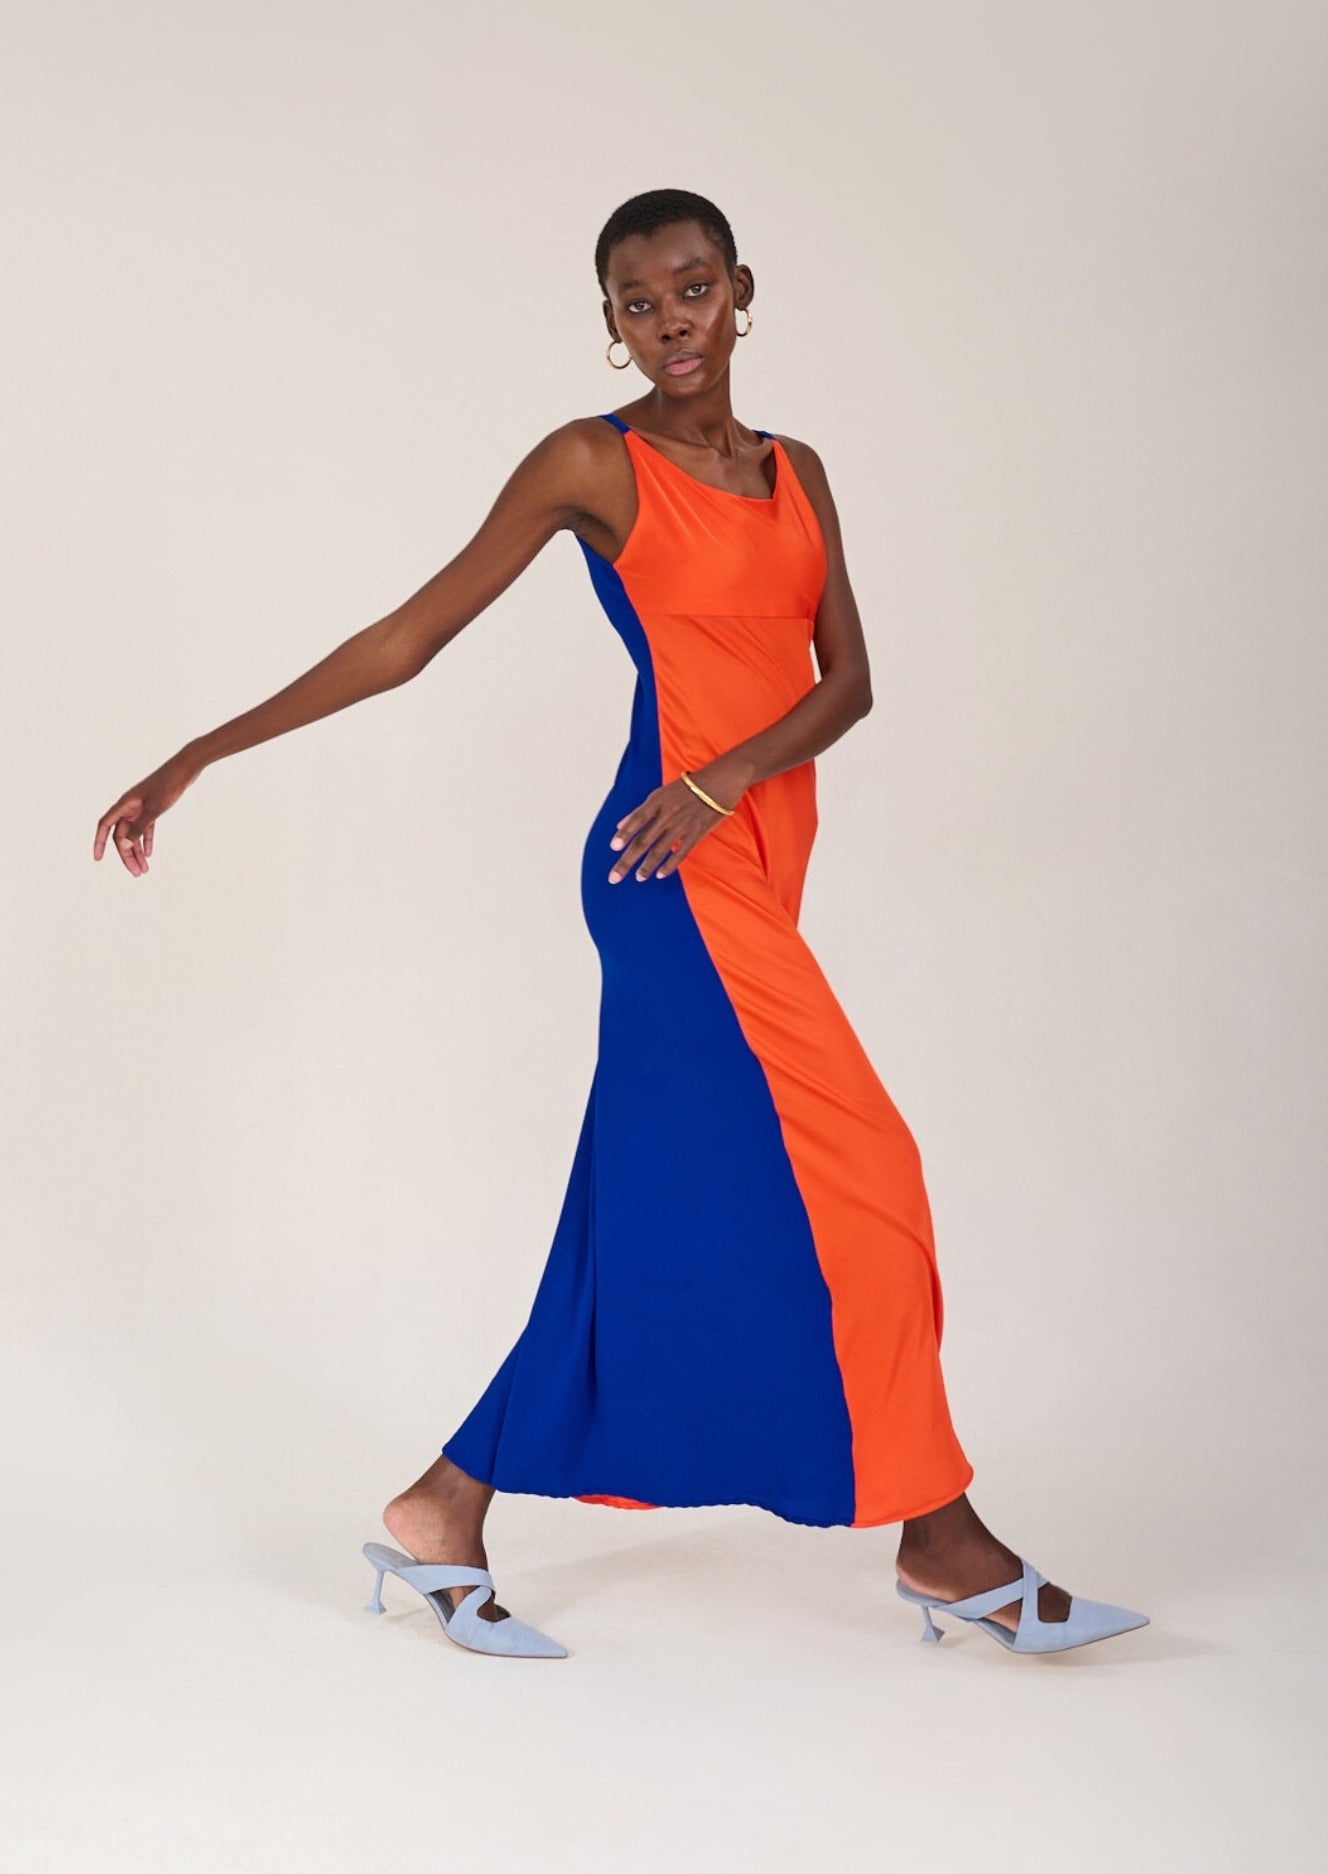 Model posing to show the curved silhouette of the KAHINDO Capepoint Slip Dress